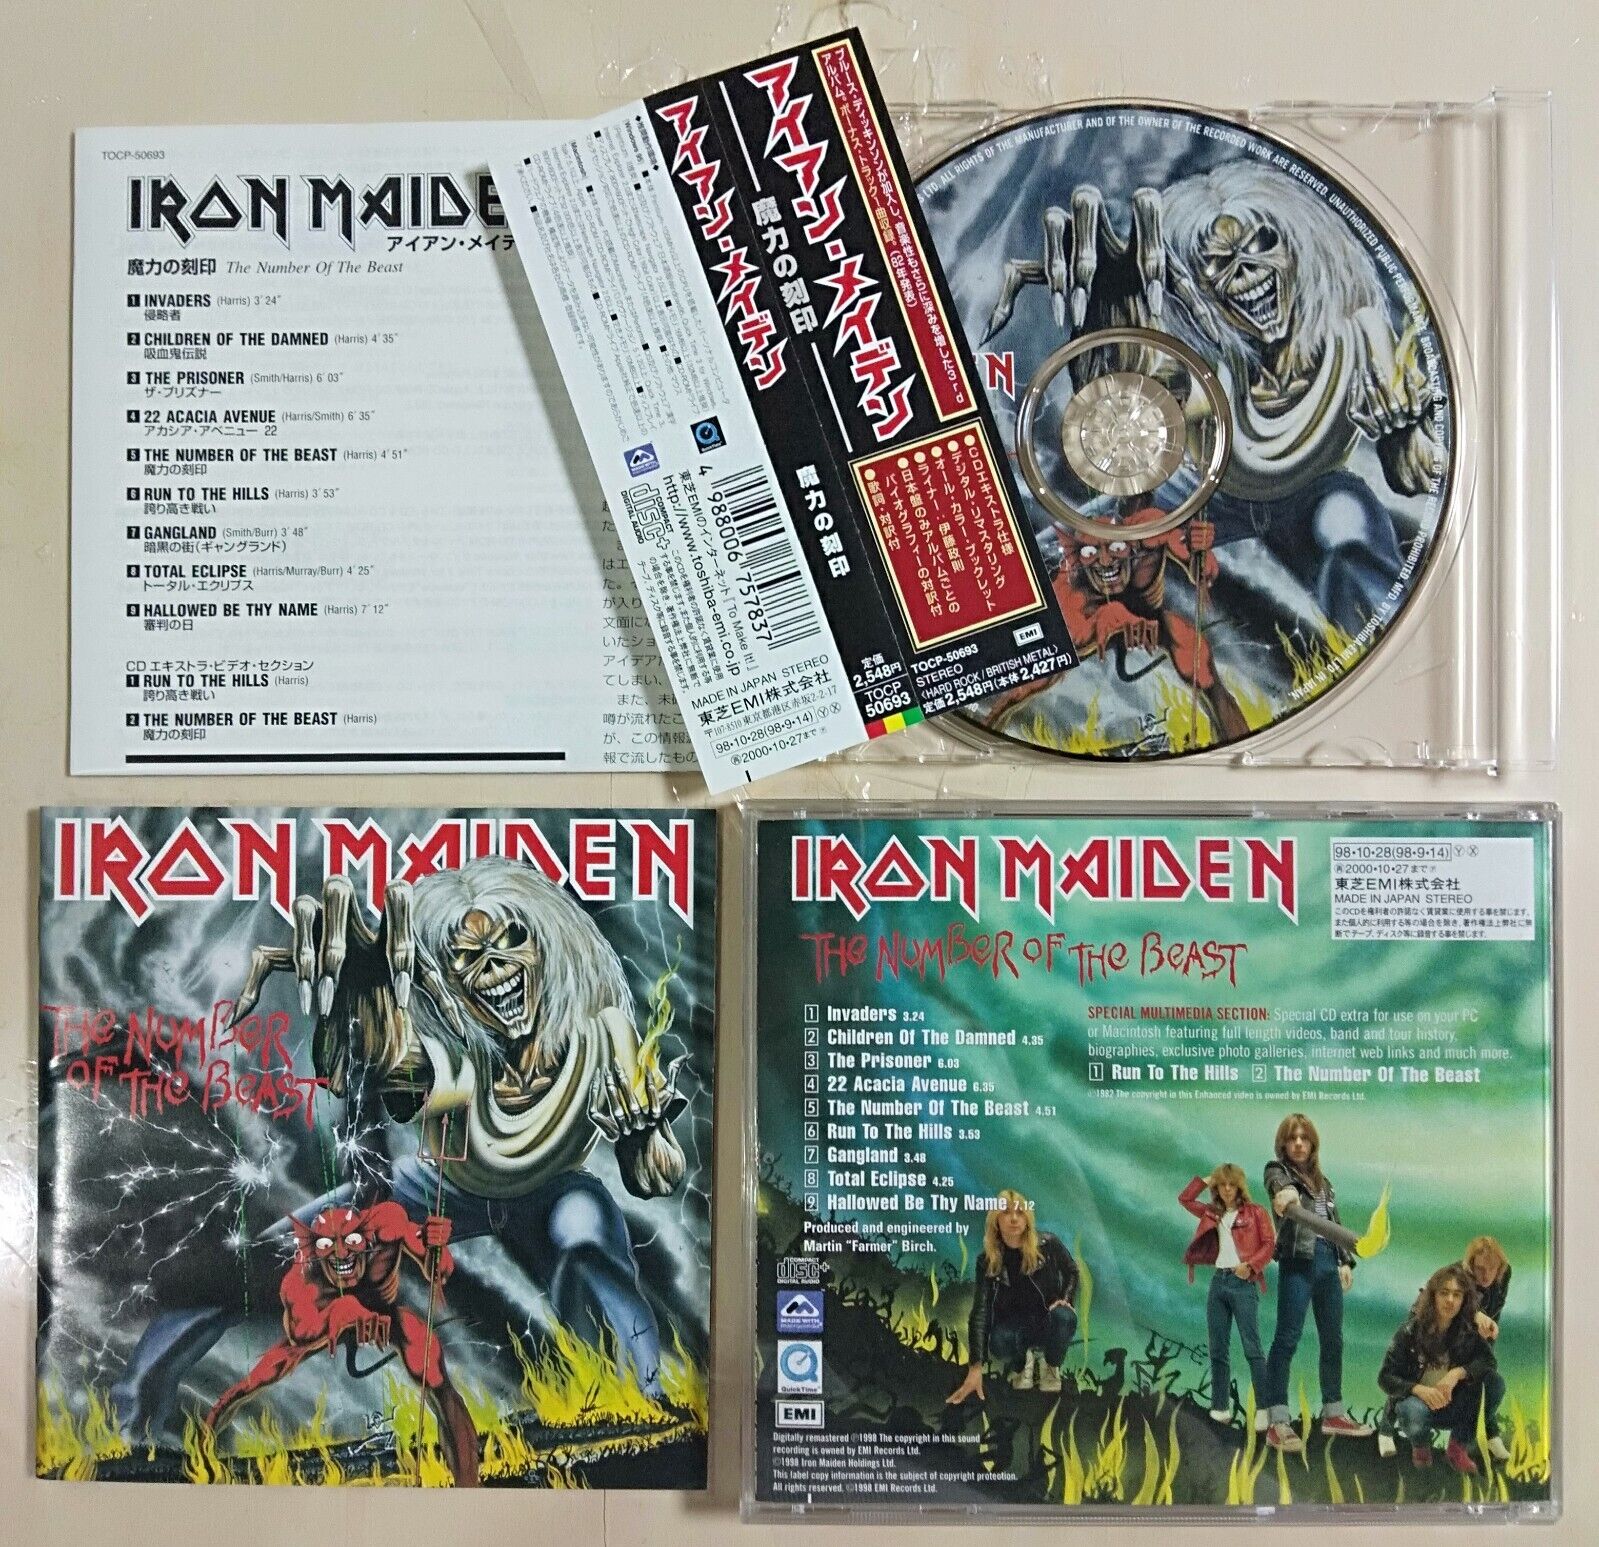 IRON MAIDEN - The Number of the Beast -1998 Japan Remaster + Extra CD OBI